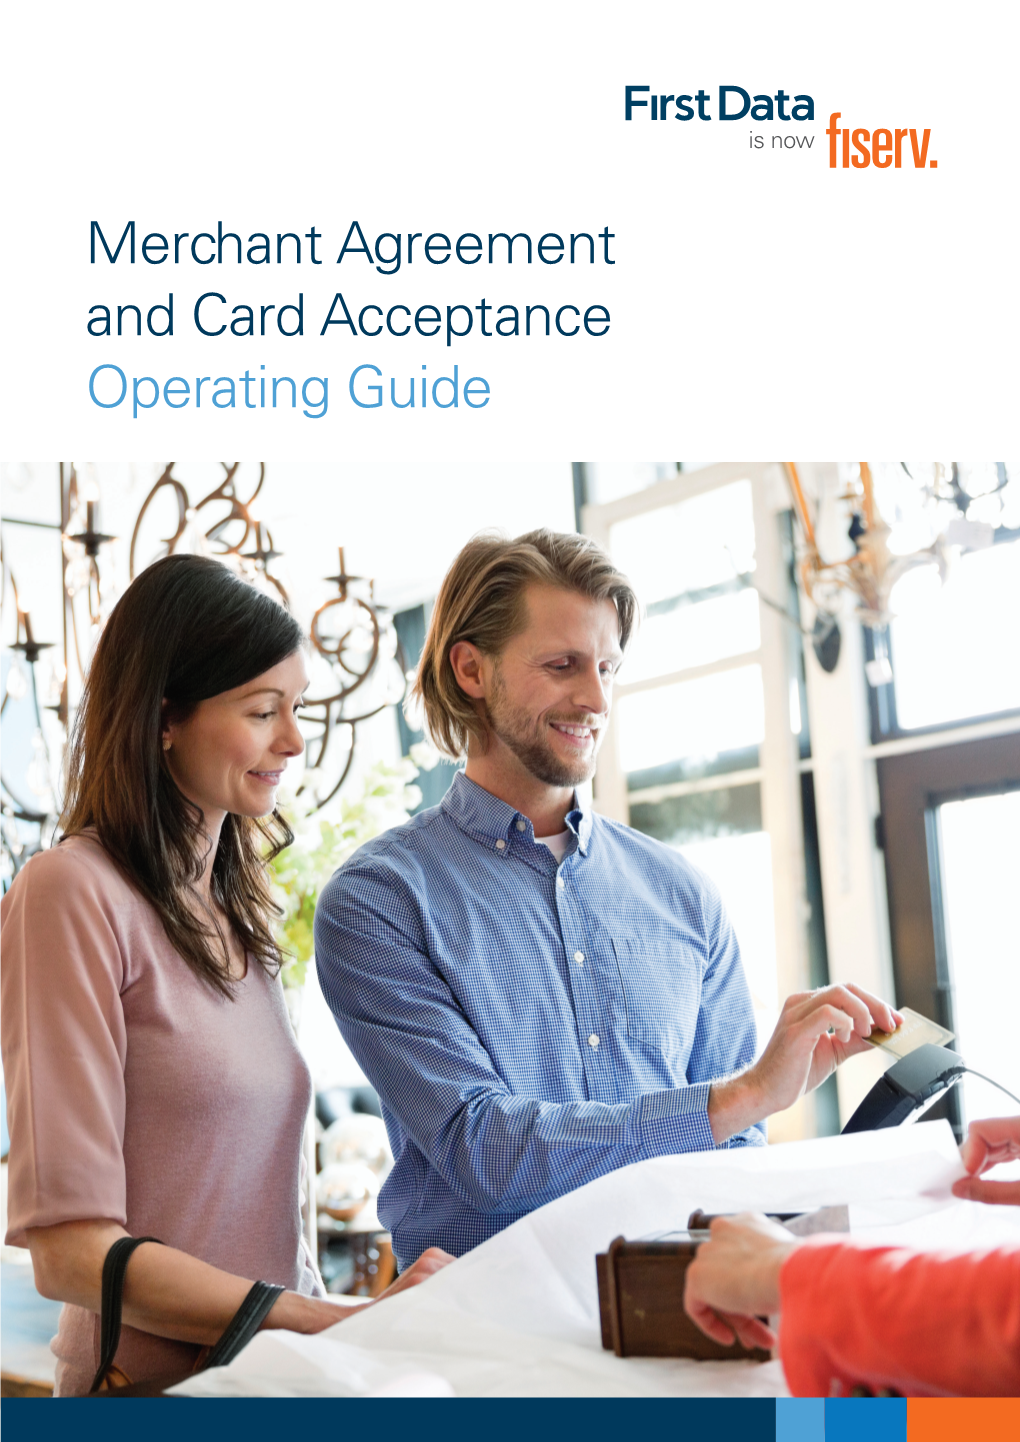 Merchant Agreement and Card Acceptance Operating Guide Contents